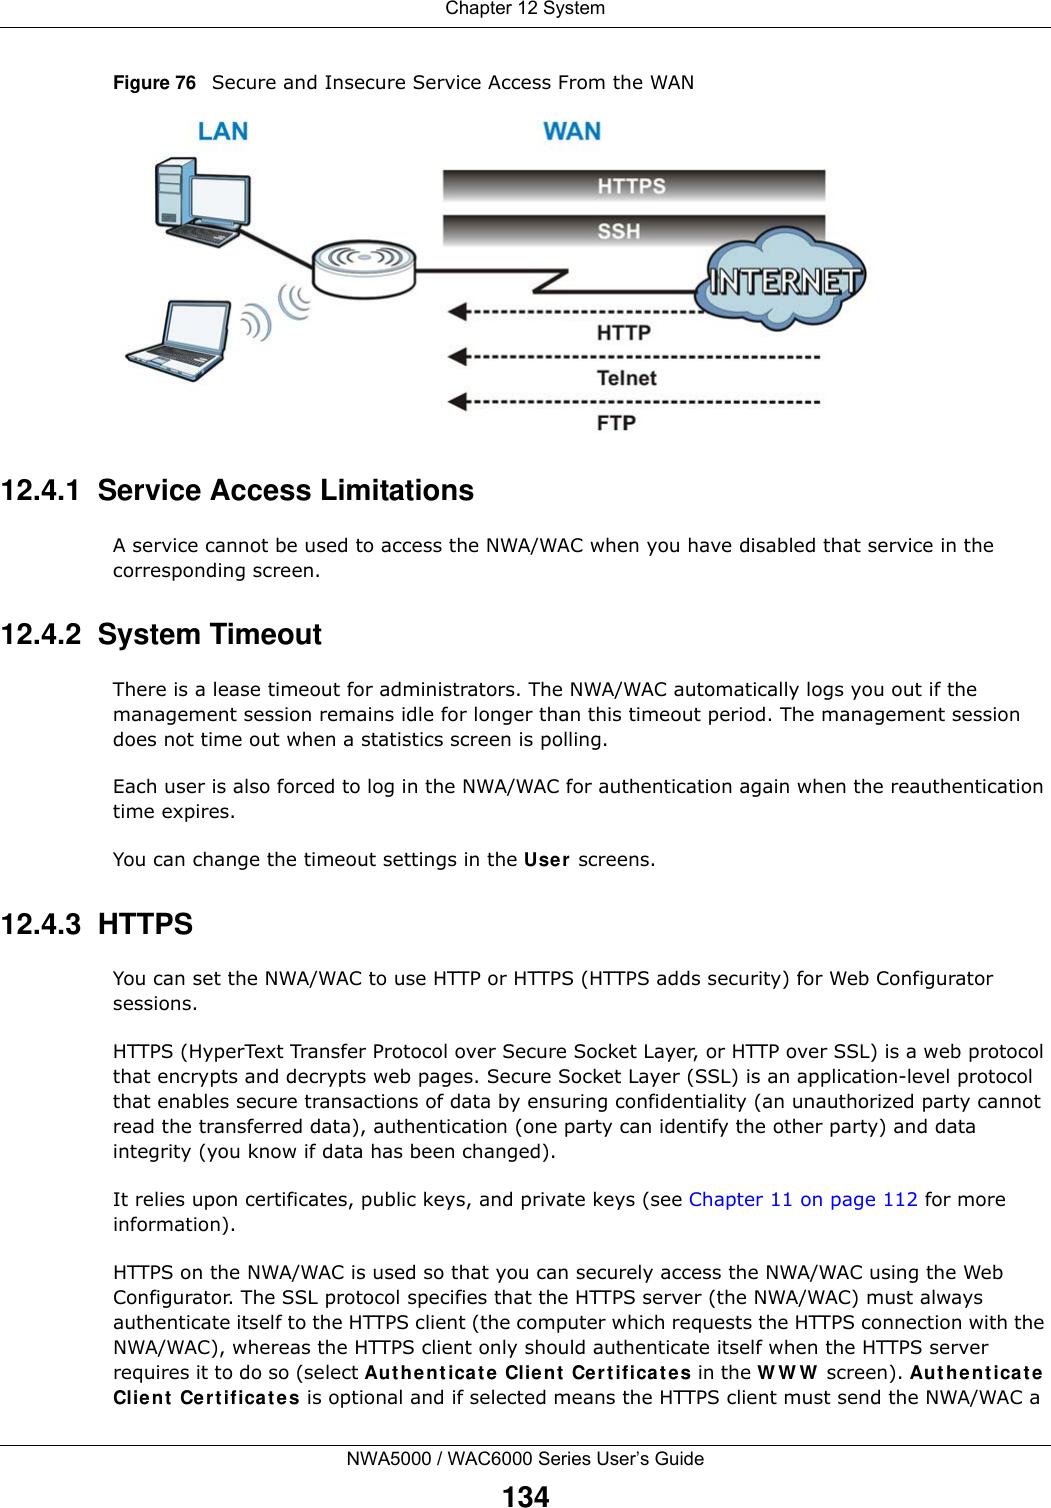 Chapter 12 SystemNWA5000 / WAC6000 Series User’s Guide134Figure 76   Secure and Insecure Service Access From the WAN12.4.1  Service Access LimitationsA service cannot be used to access the NWA/WAC when you have disabled that service in the corresponding screen.12.4.2  System TimeoutThere is a lease timeout for administrators. The NWA/WAC automatically logs you out if the management session remains idle for longer than this timeout period. The management session does not time out when a statistics screen is polling. Each user is also forced to log in the NWA/WAC for authentication again when the reauthentication time expires. You can change the timeout settings in the User screens.12.4.3  HTTPSYou can set the NWA/WAC to use HTTP or HTTPS (HTTPS adds security) for Web Configurator sessions. HTTPS (HyperText Transfer Protocol over Secure Socket Layer, or HTTP over SSL) is a web protocol that encrypts and decrypts web pages. Secure Socket Layer (SSL) is an application-level protocol that enables secure transactions of data by ensuring confidentiality (an unauthorized party cannot read the transferred data), authentication (one party can identify the other party) and data integrity (you know if data has been changed). It relies upon certificates, public keys, and private keys (see Chapter 11 on page 112 for more information).HTTPS on the NWA/WAC is used so that you can securely access the NWA/WAC using the Web Configurator. The SSL protocol specifies that the HTTPS server (the NWA/WAC) must always authenticate itself to the HTTPS client (the computer which requests the HTTPS connection with the NWA/WAC), whereas the HTTPS client only should authenticate itself when the HTTPS server requires it to do so (select Authenticate Client Certificates in the WWW screen). Authenticate Client Certificates is optional and if selected means the HTTPS client must send the NWA/WAC a 